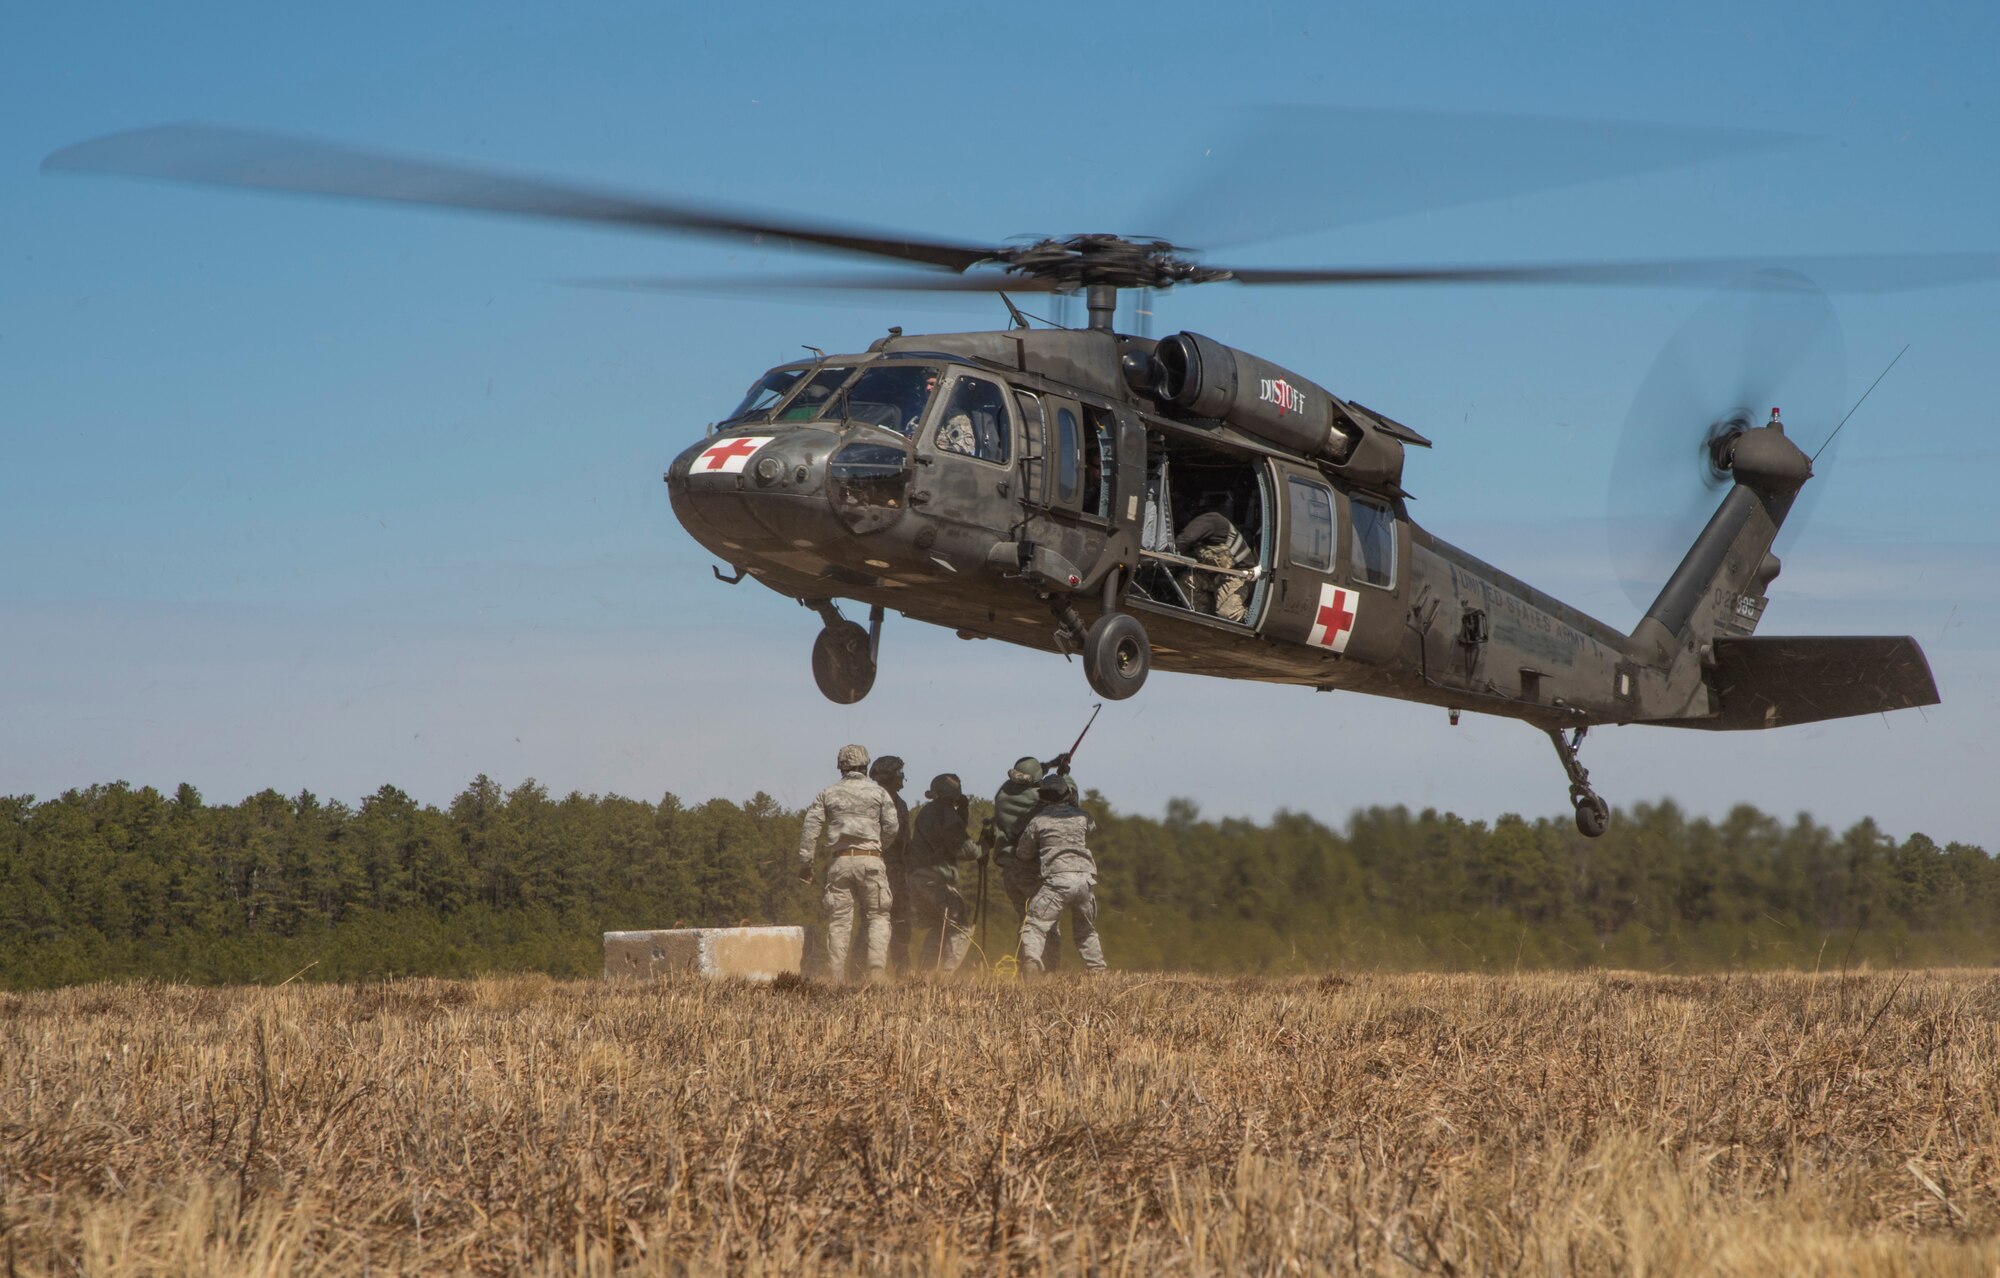 Airmen from the 621st Contingency Response Wing hook up  cargo to a U.S. Army UH-60 Black Hawk helicopter from the 1-150th Assault Helicopter Battalion during sling-load training at Joint Base McGuire-Dix-Lakehurst, N.J., April 1, 2015. The training allows the Army pilots and crew members and Air Force airmen to stay proficient with sling-load operations. (U.S. Air Force photo/Staff Sgt. Gustavo Gonzalez/RELEASED)